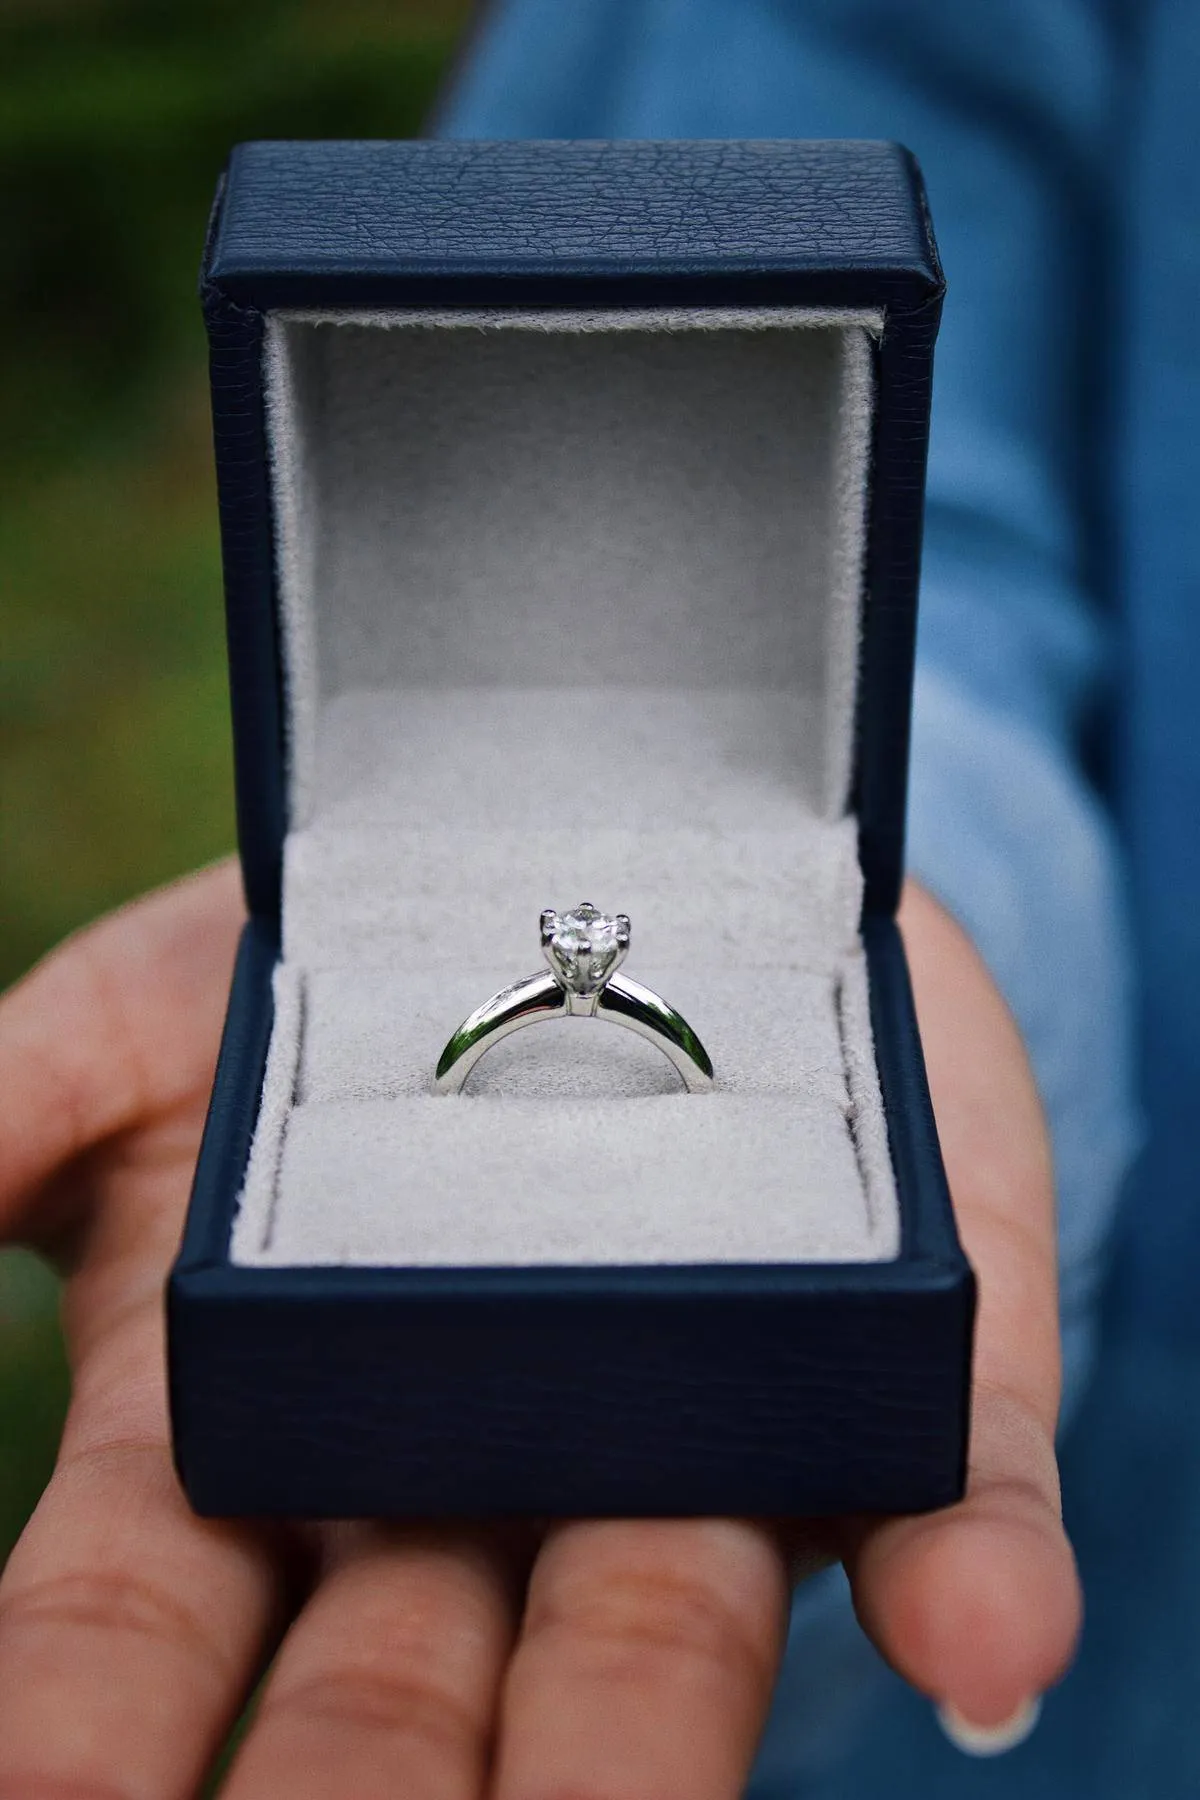 Hand holds out a box that contains a diamond engagement ring